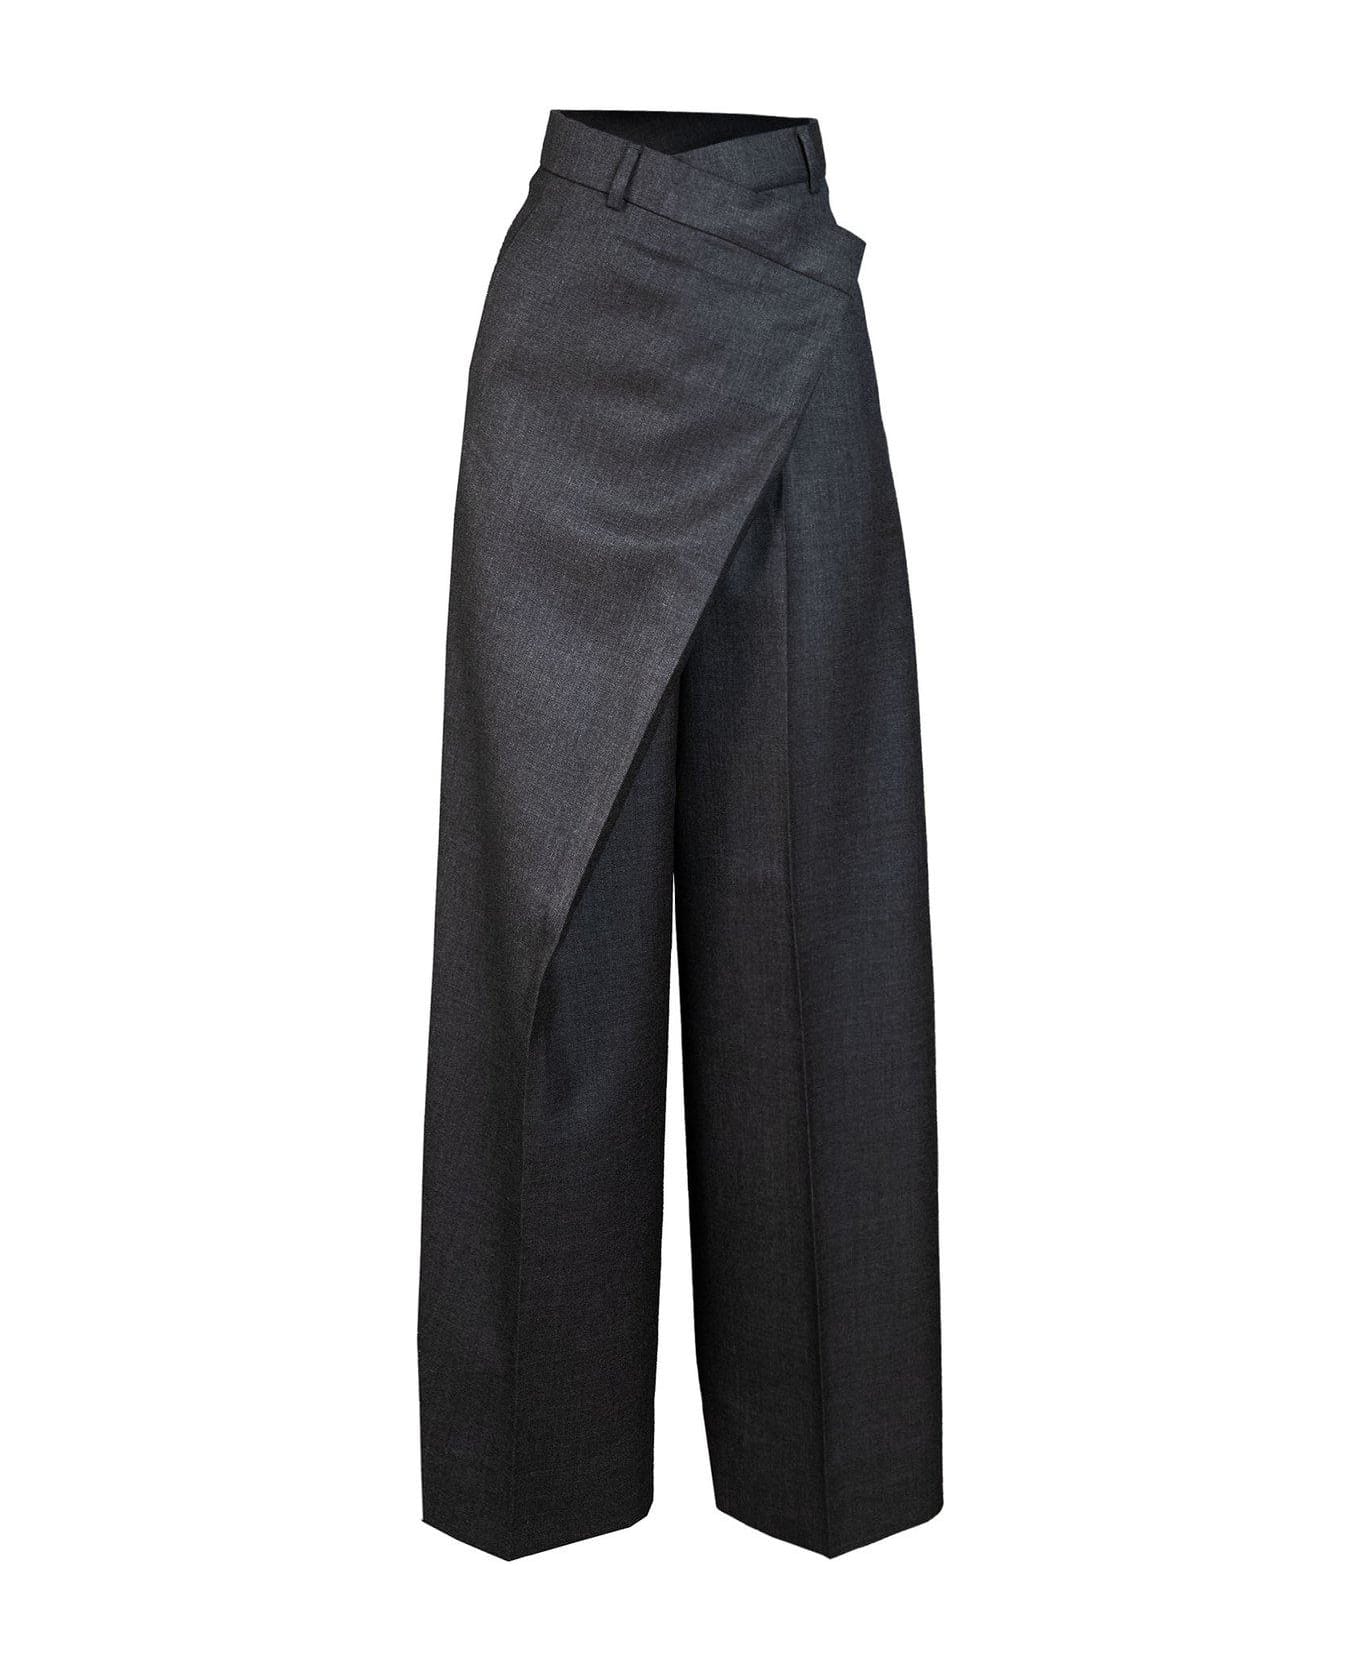 Acne Studios Tailored Wrap Trousers - GREY ボトムス